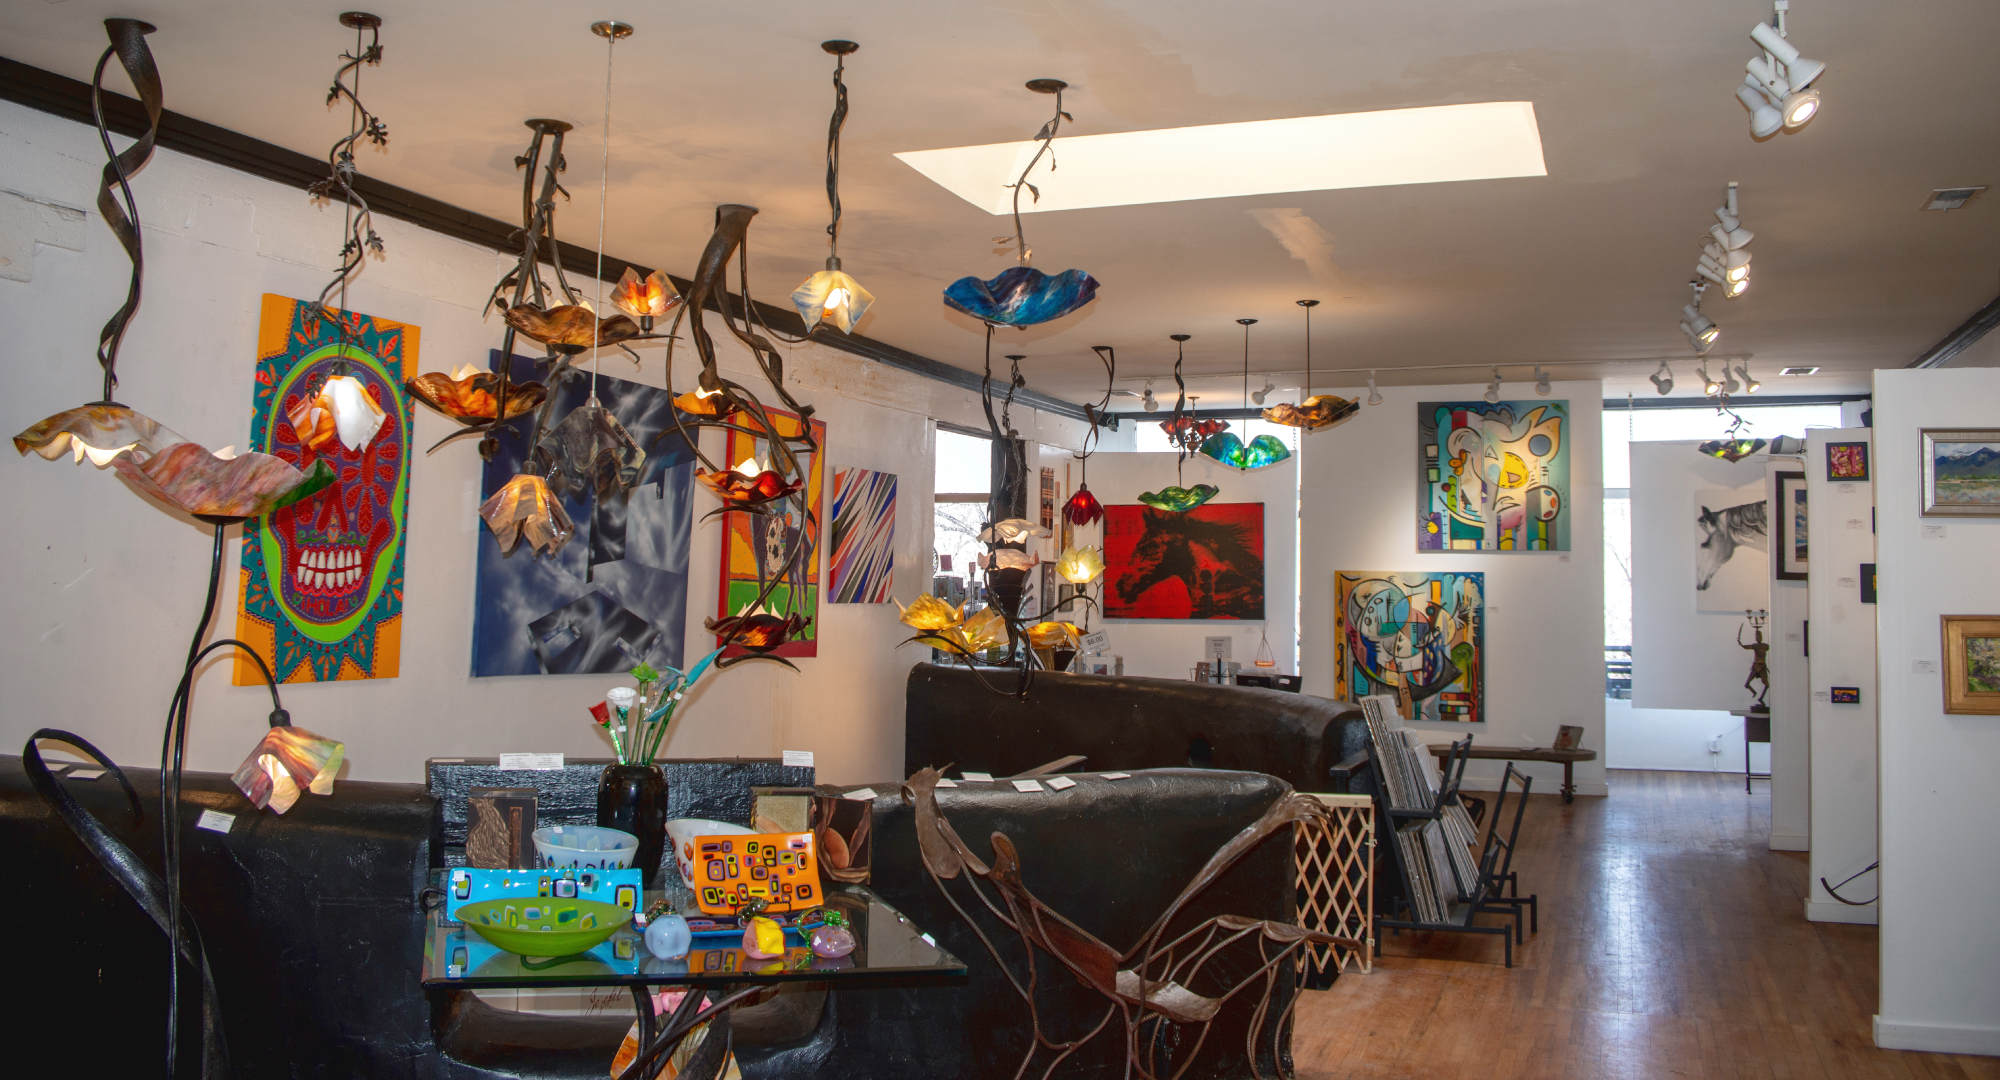 view of Jezebel Gallery, a art gallery in Madrid, New Mexico. image shows large slumped glass chandeliers and paintings on the walls